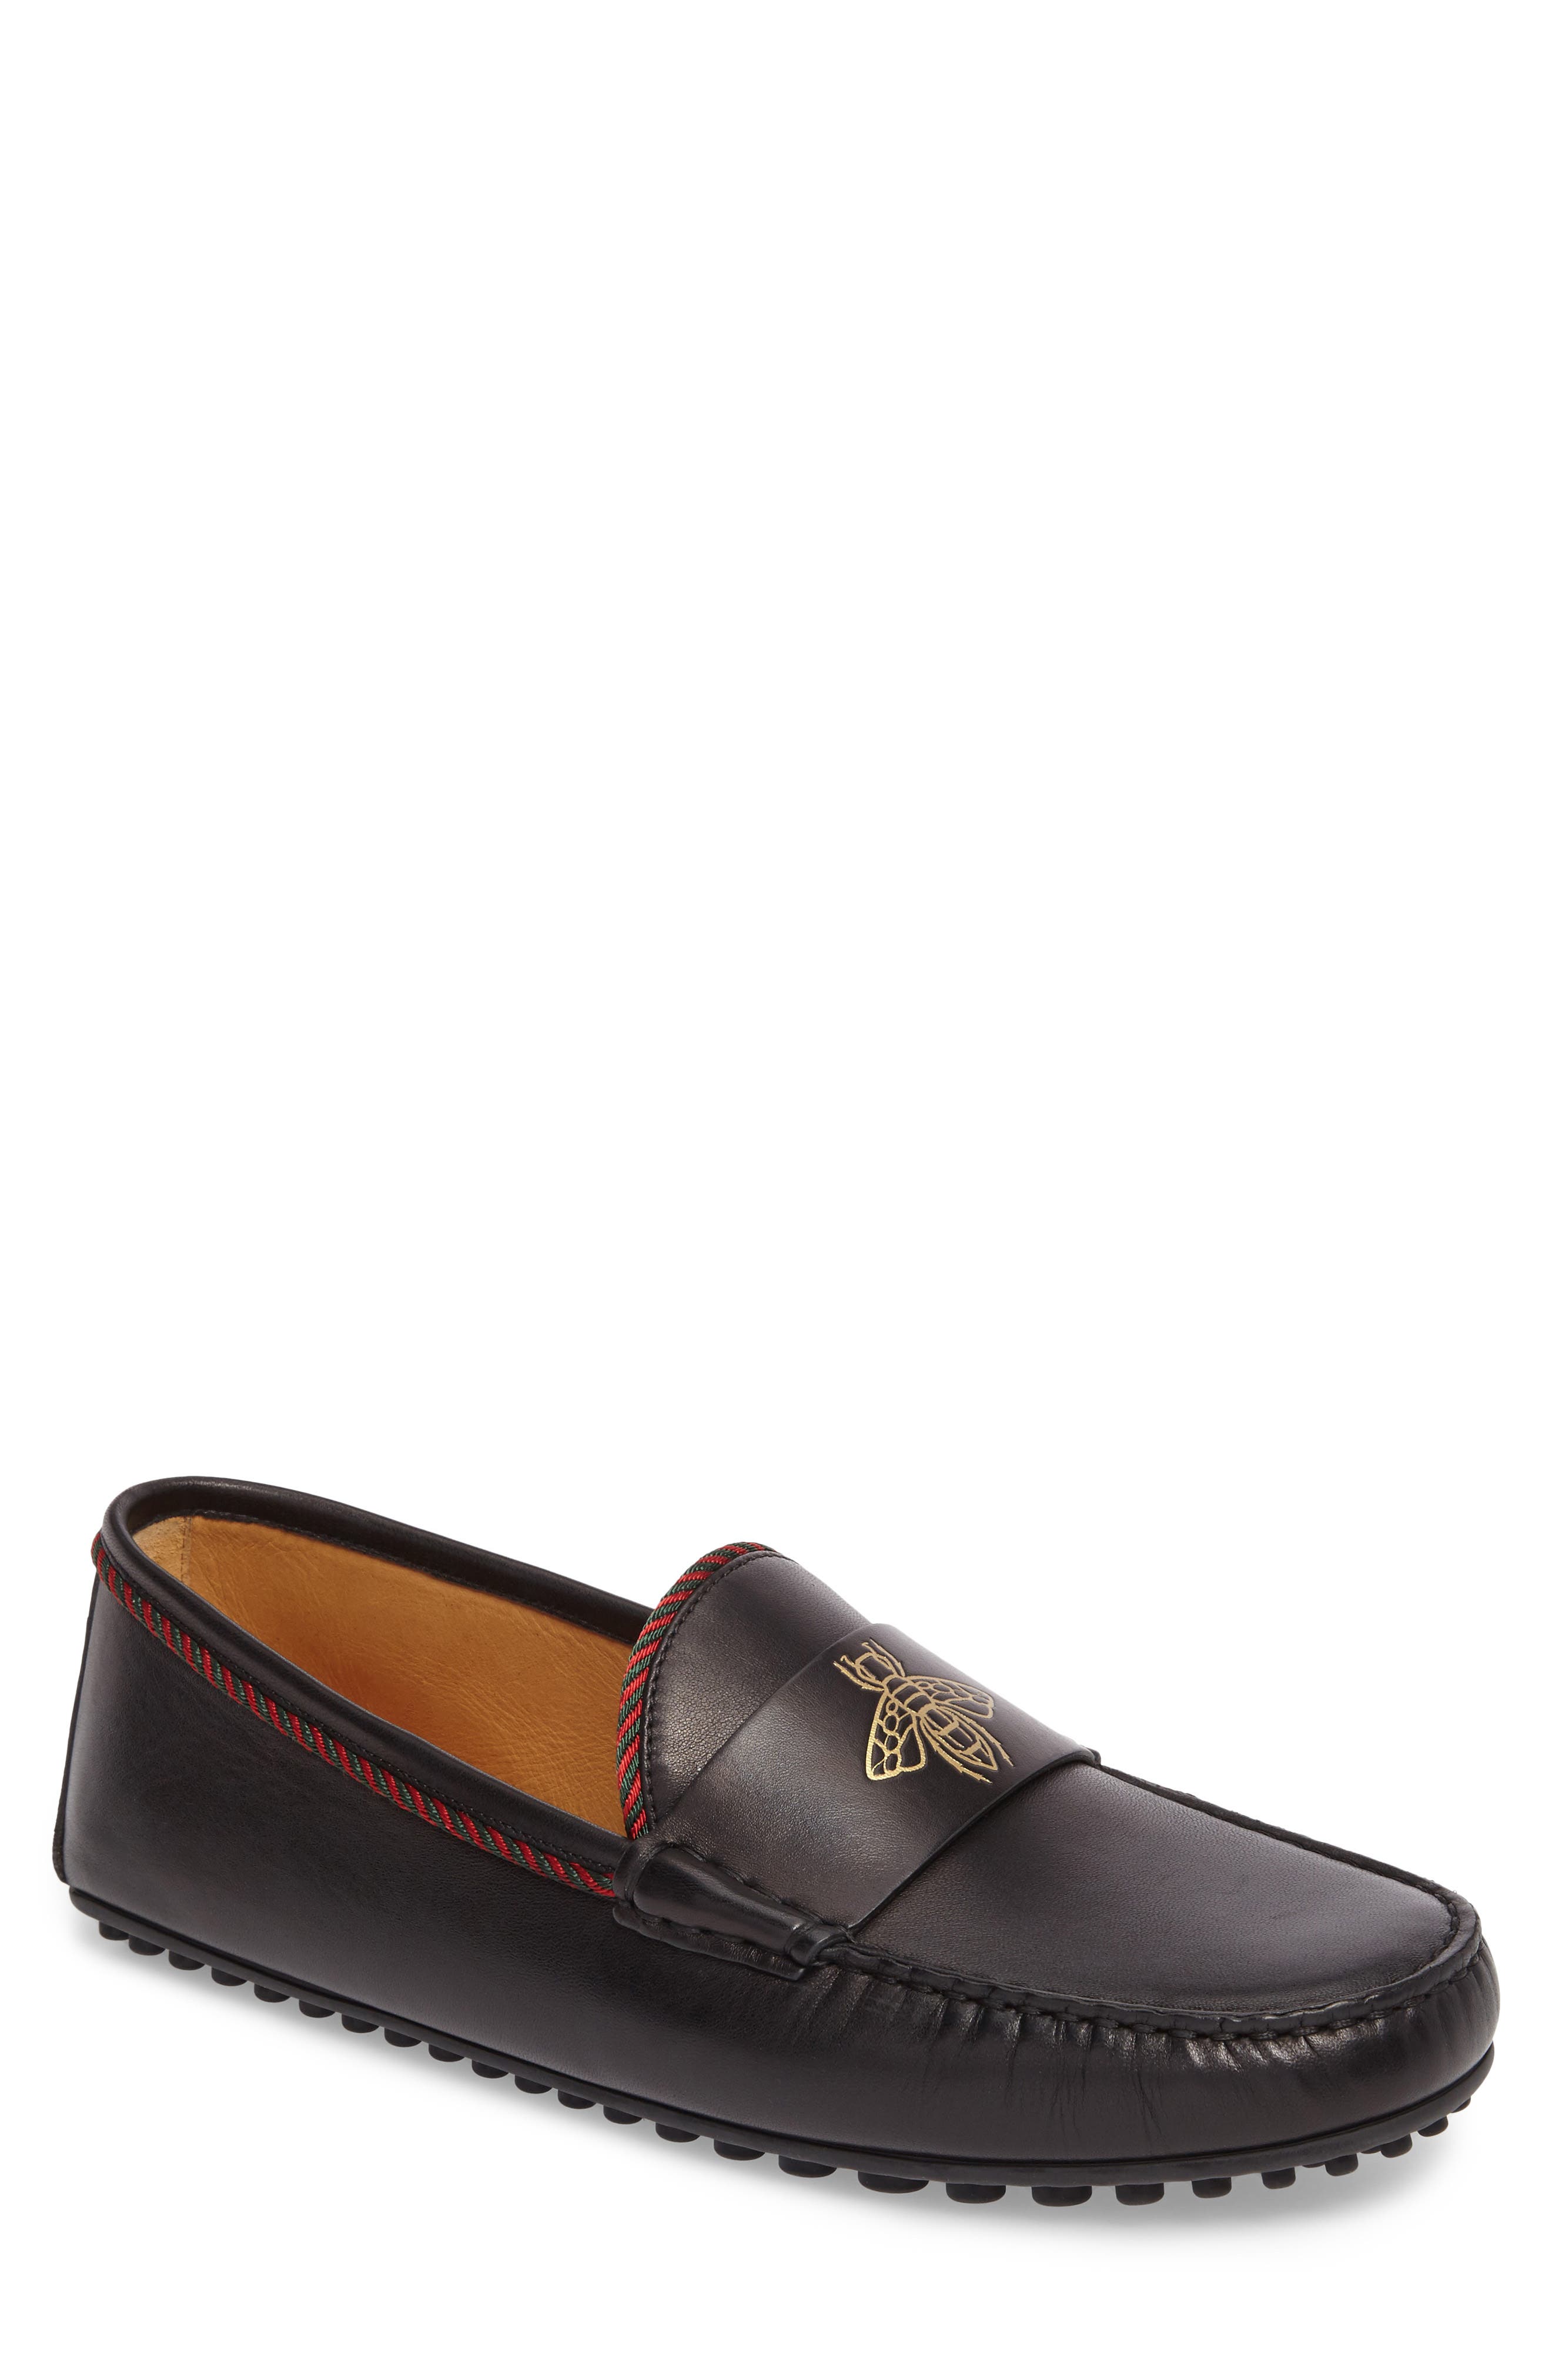 Gucci Bee Leather Driving Shoe (Men 